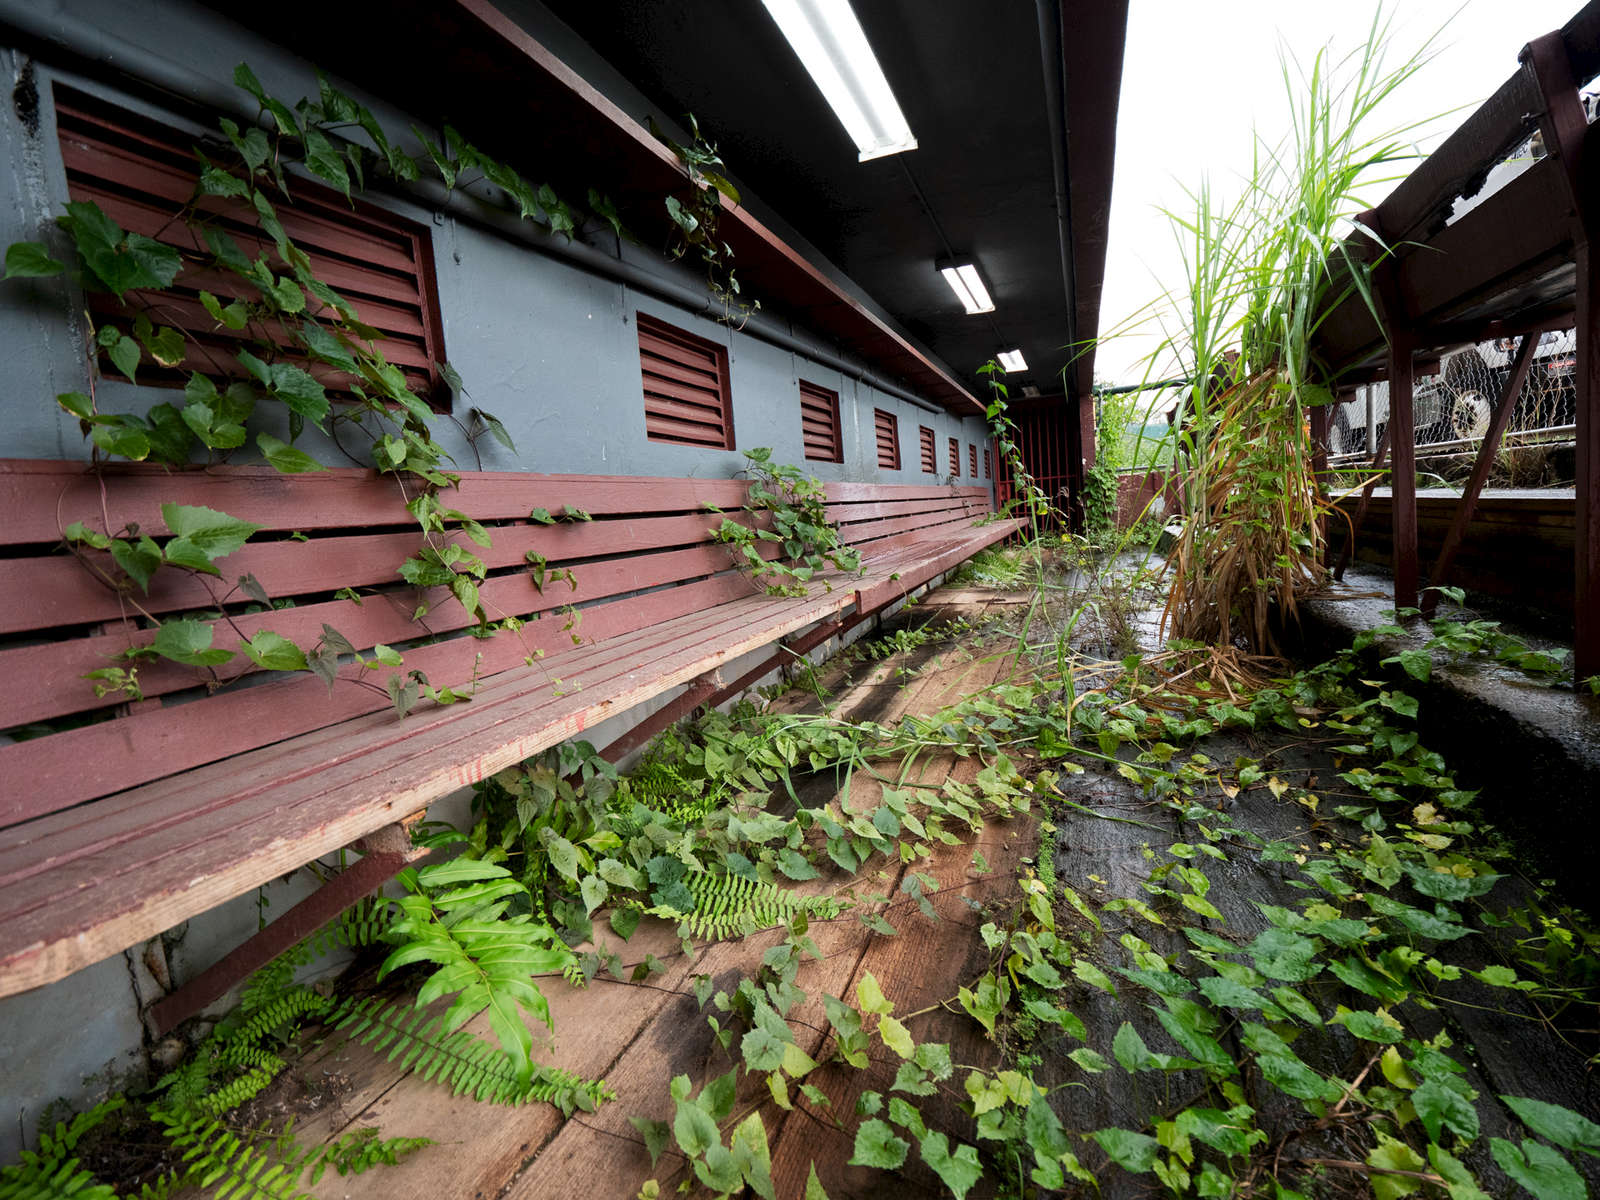 CAGUAS, PUERTO RICO - NOVEMBER 14:  A view of weeds growing in the third base dugout of the Yldefonso Sola Morrales Stadium in Caguas, Puerto Rico on November 14, 2018.  It was of the home of the  Puerto Rican baseball League team the Criollos de Caguas.  The stadium is scheduled to be demolished due to the heavy damage caused by Hurricane Maria. The effort continues in Puerto Rico to remain and rebuild more than one year after the Hurricane Maria hit and devastated the island on September 20, 2017. The official number of deaths from the disaster is 2,975. 